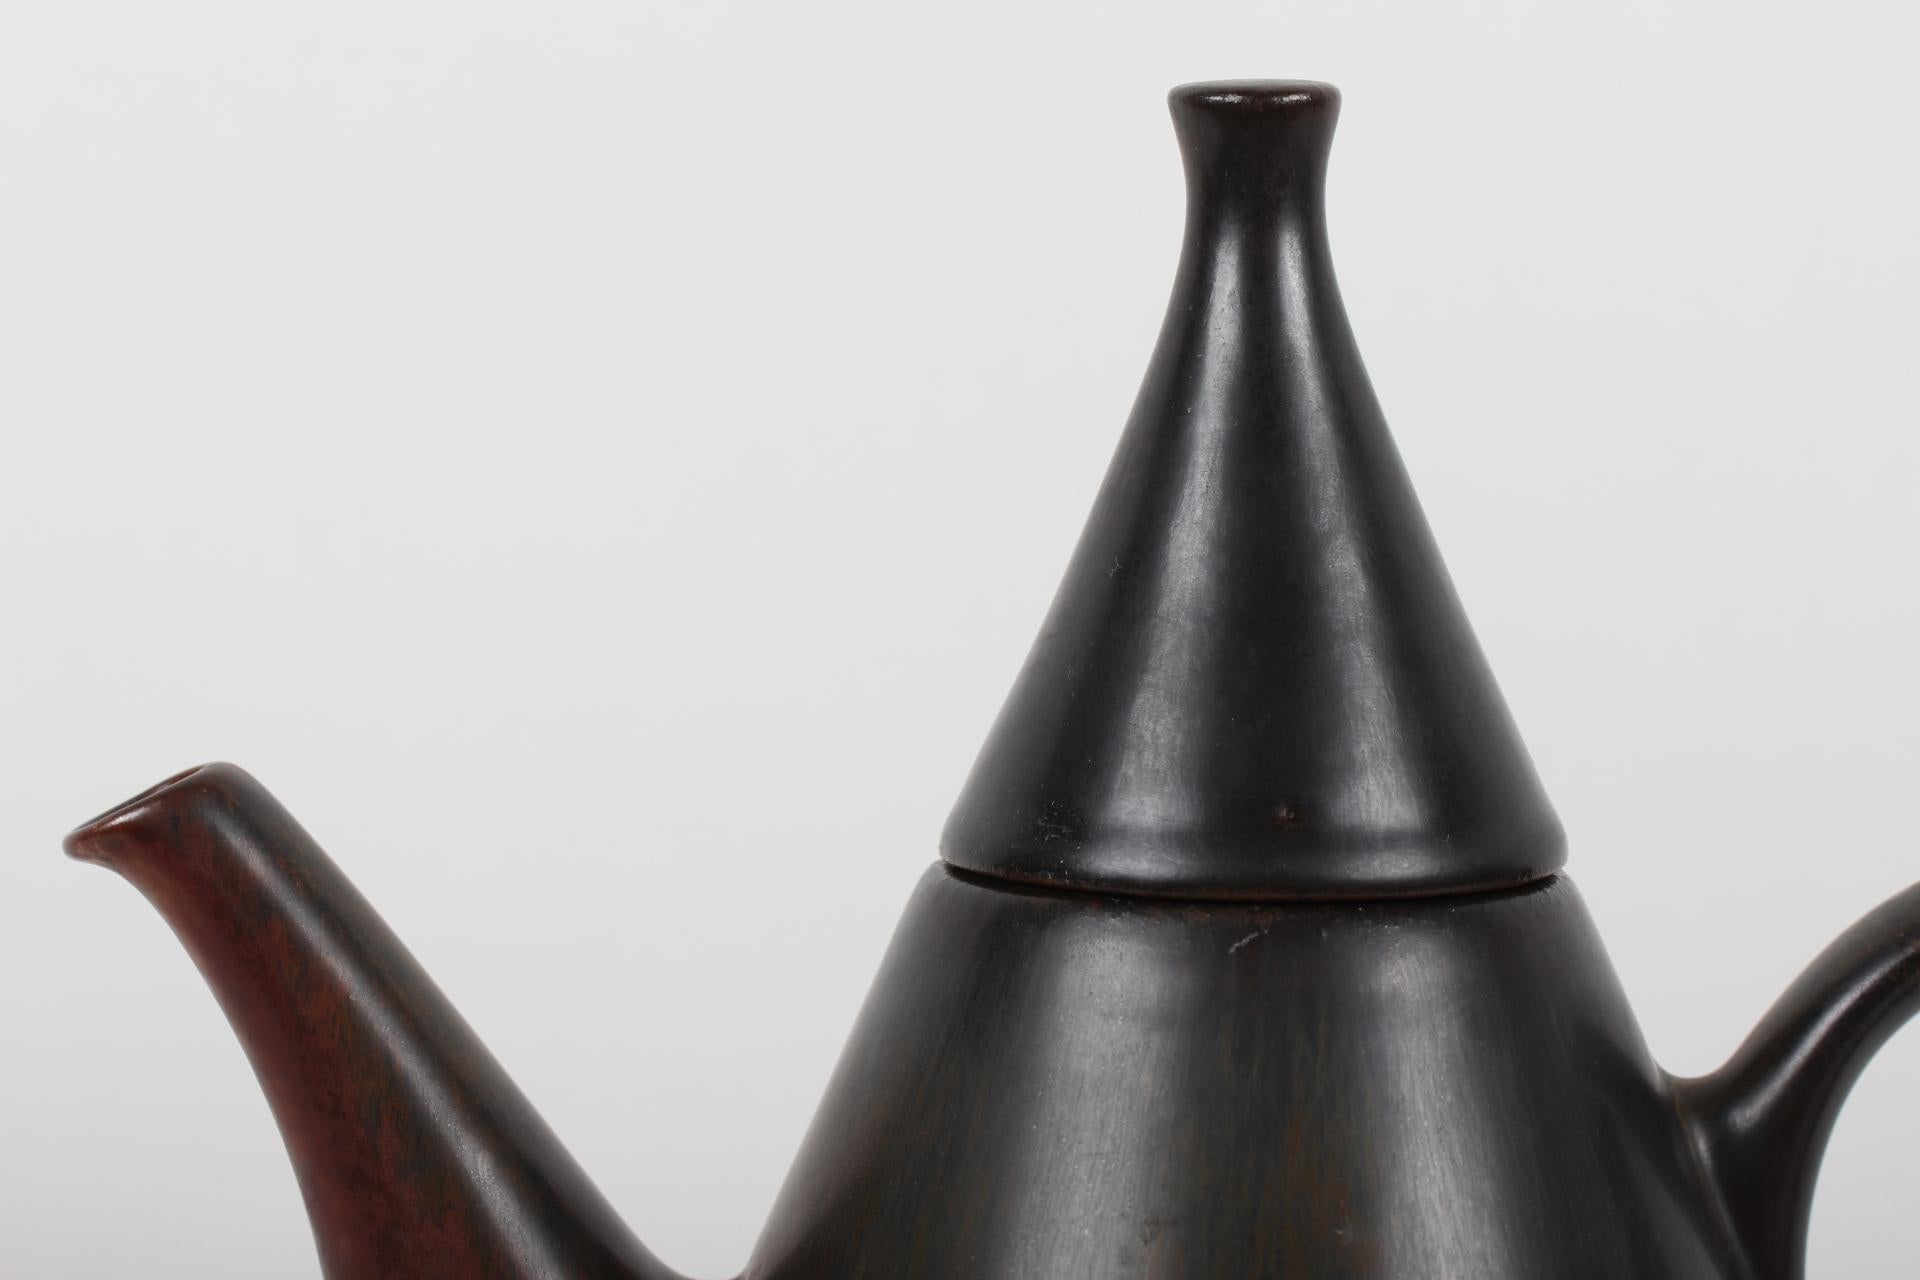 Rare and very special conical formed ceramic teapot is designed by the famous Swedish ceramist Carl-Harry Staalhane (1920-1990) and manufactured by Rörstrand Sweden

The teapot is decorated with dark red-brown glaze
Signed Rörstrand Sweden,